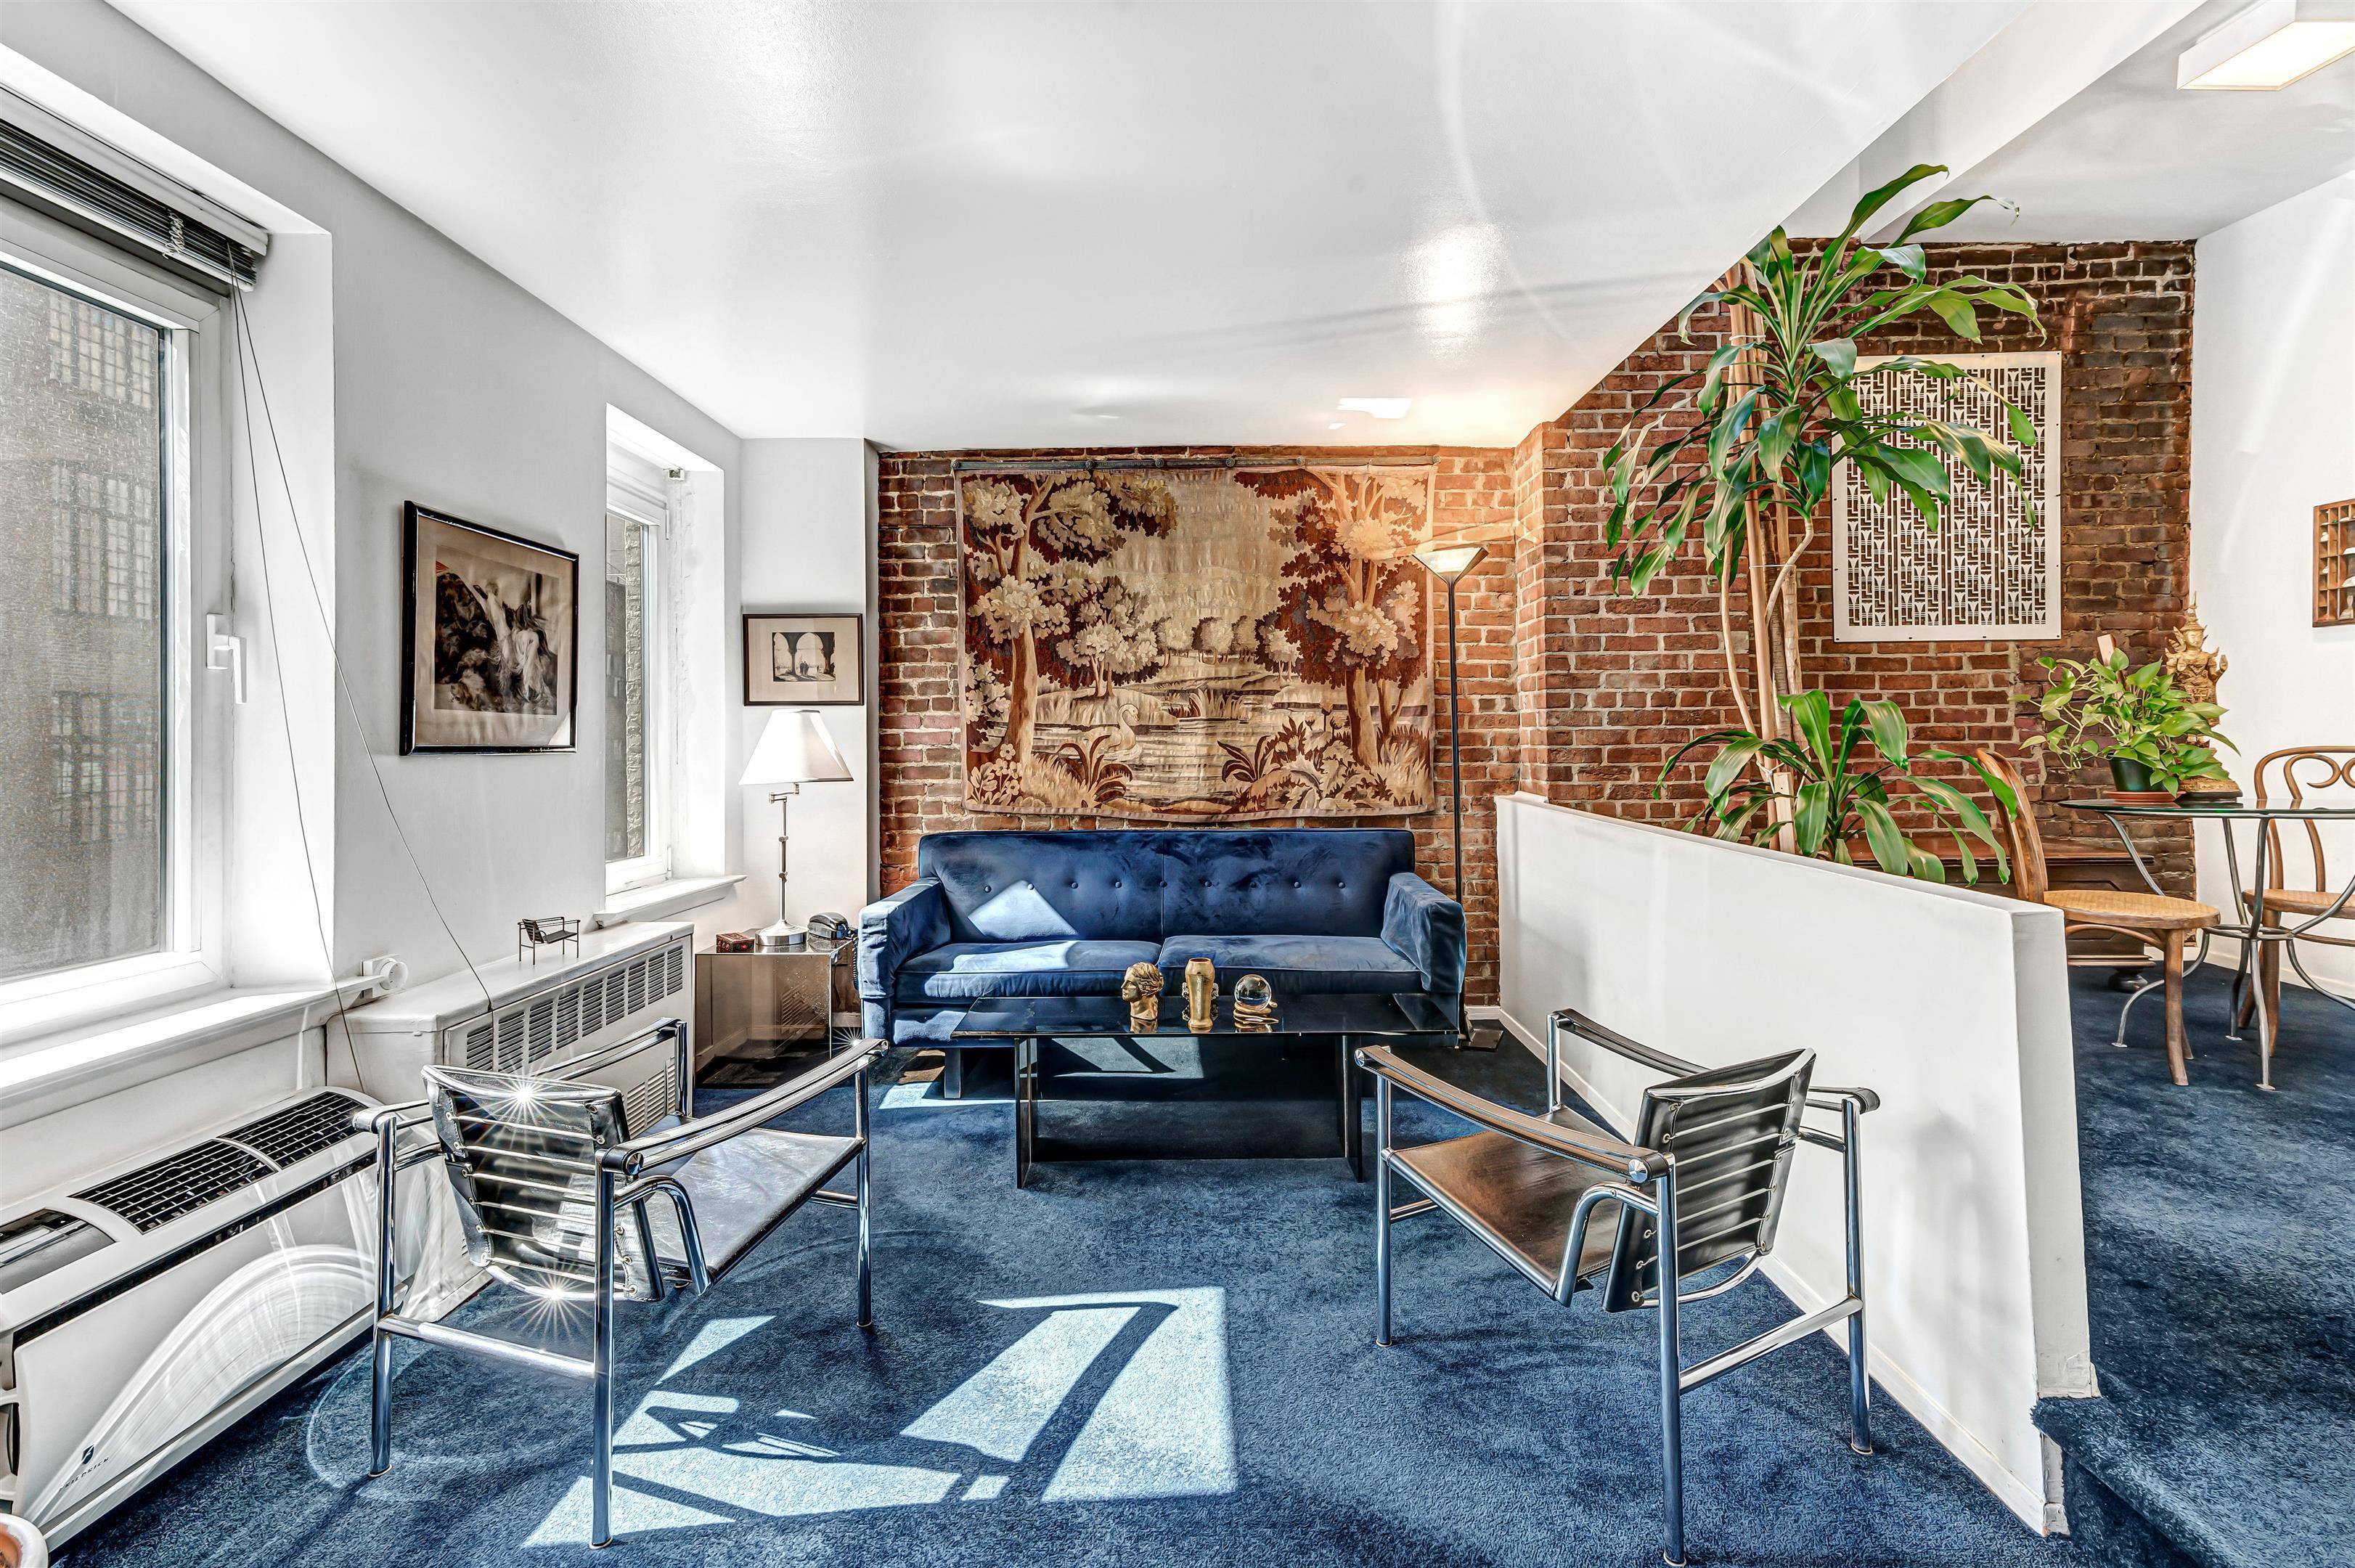 Situated on the top floor of an elevator building, Apartment 5A is a charming Upper East Side duplex that offers an exceptional living experience marked by the delights and amenities ...